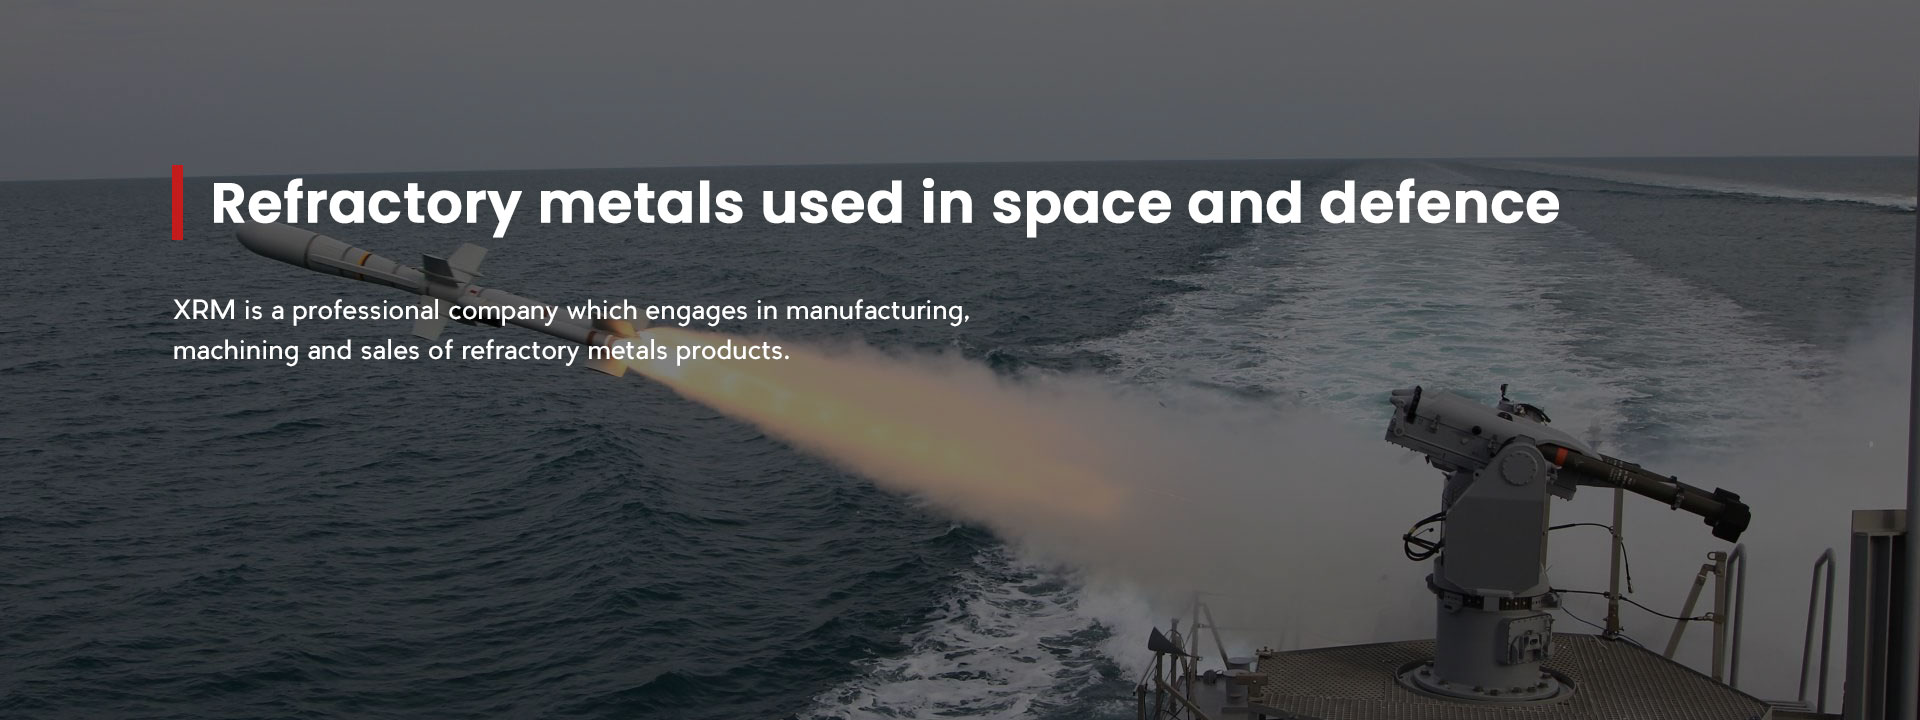 Refractory metals used in space and defence